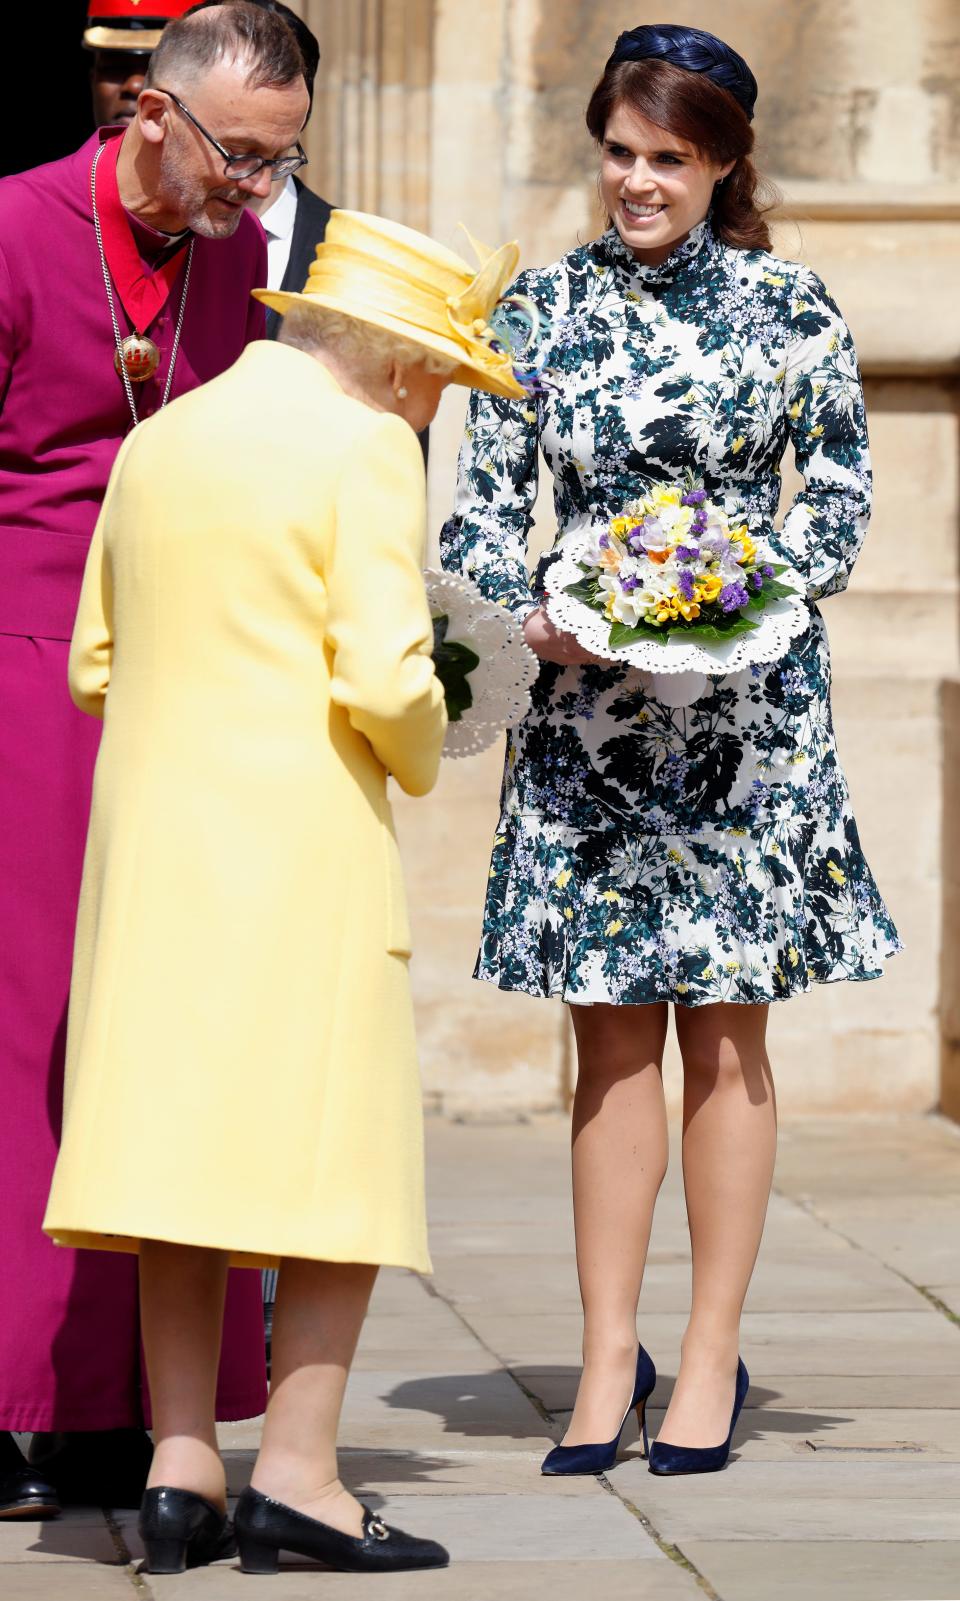 Queen Elizabeth II and Princess Eugenie attend the traditional Royal Maundy Service at St George's Chapel on April 18, 2019